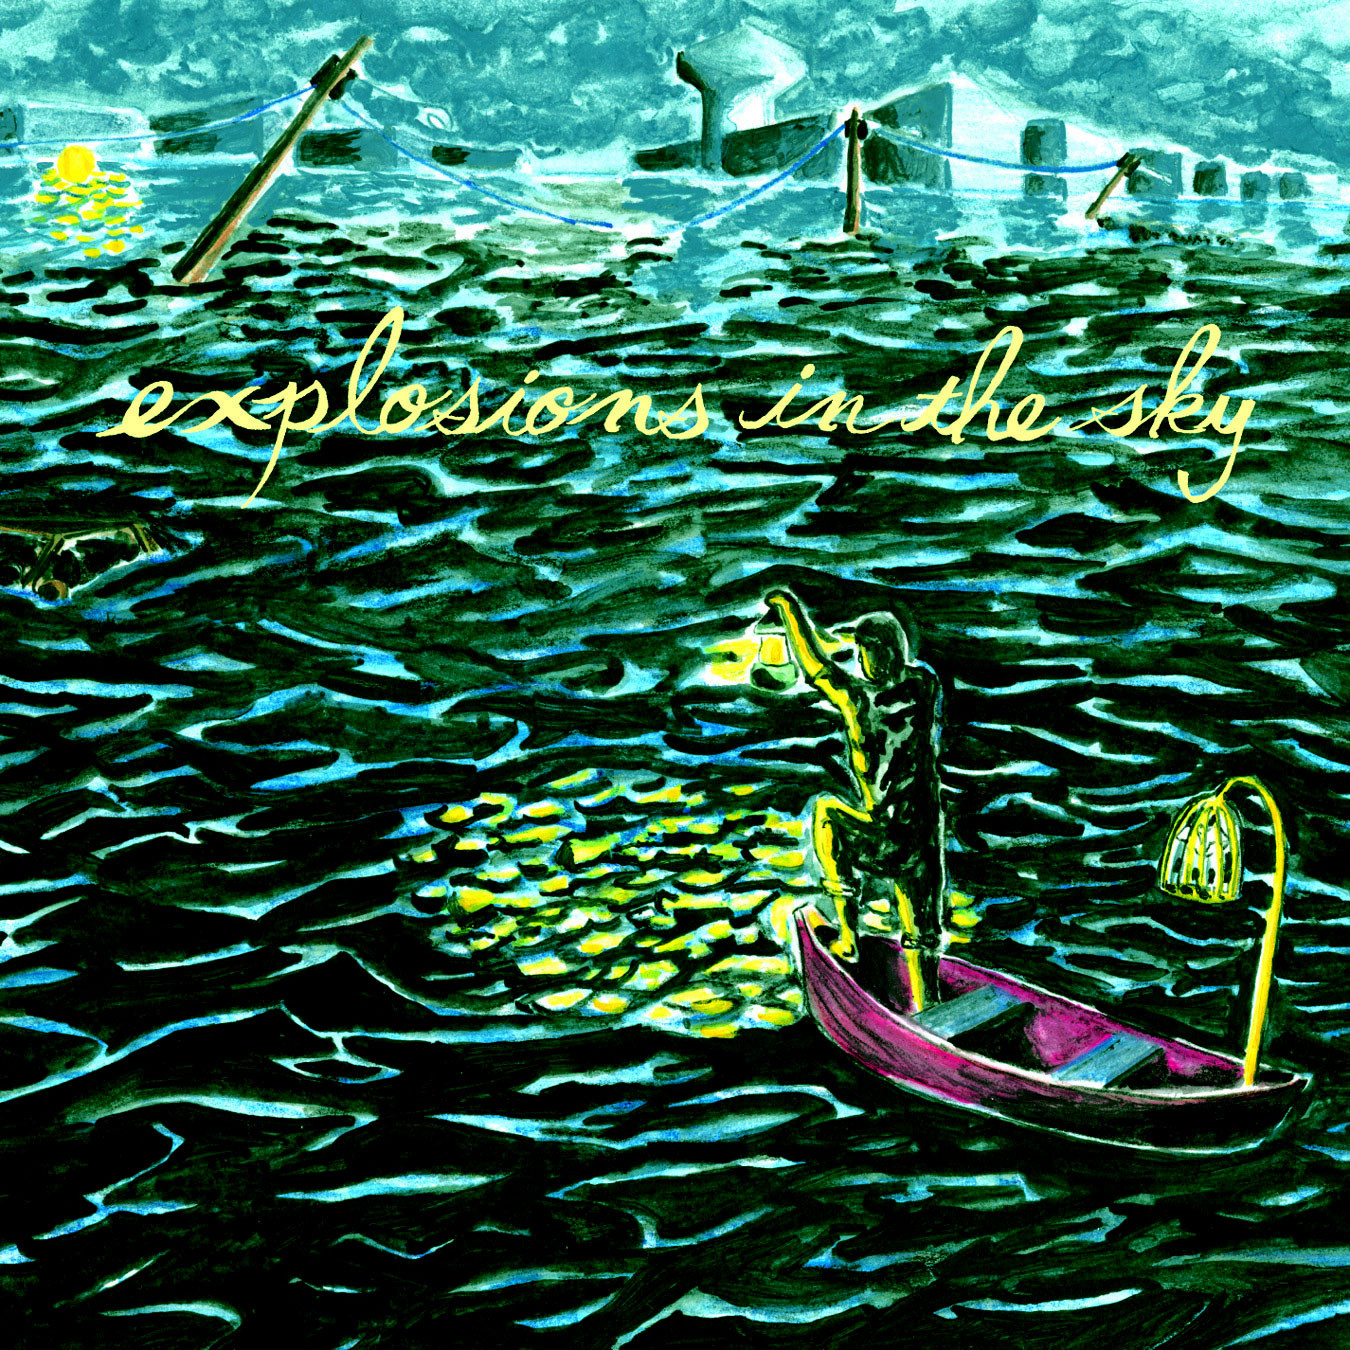 All of a Sudden I Miss Everyone (2007) by Explosions in the Sky